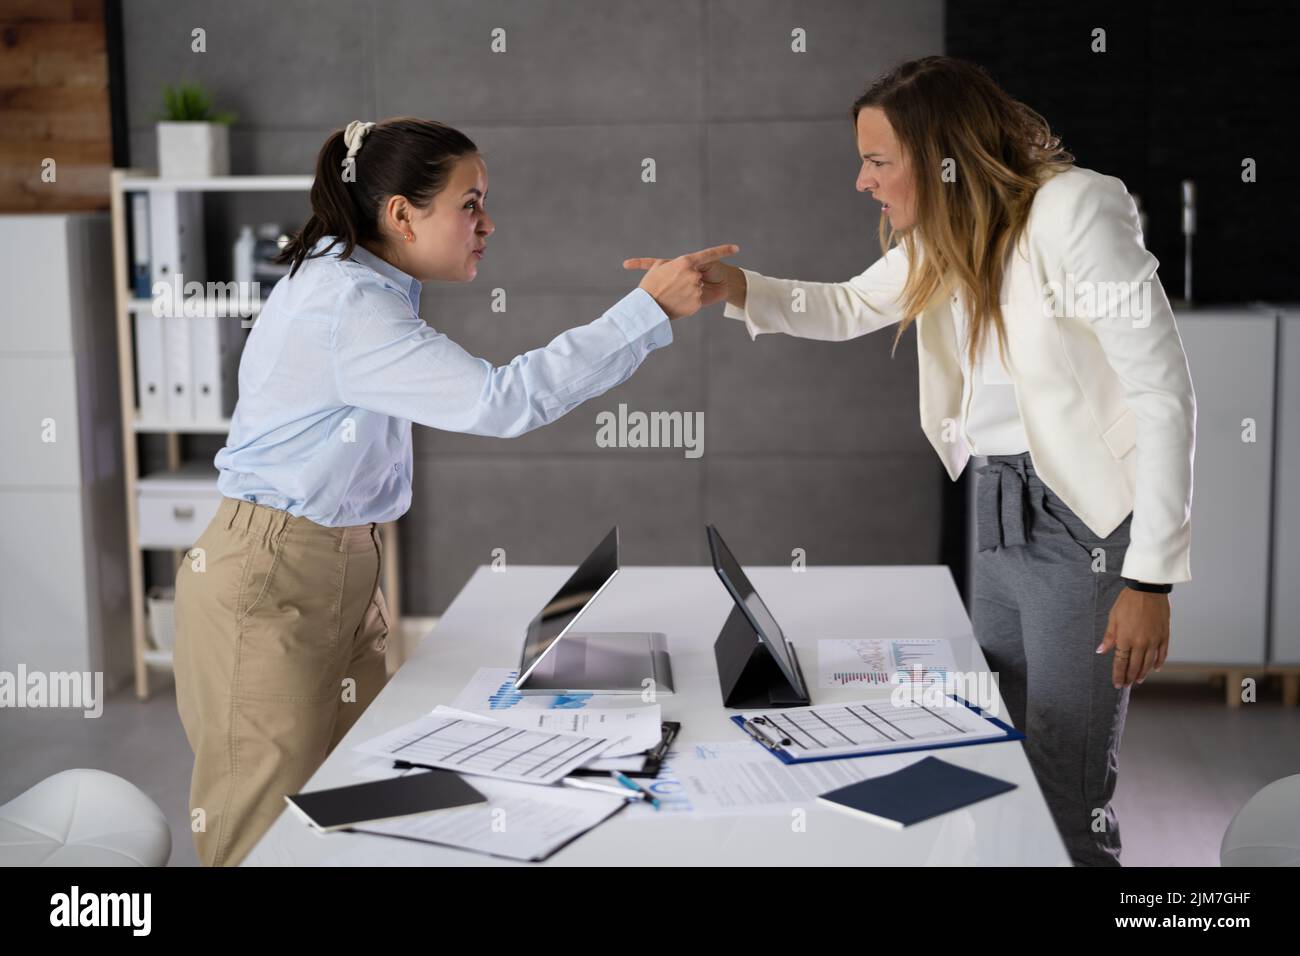 Office Quarrel. Worker Women Fighting Each Other Stock Photo